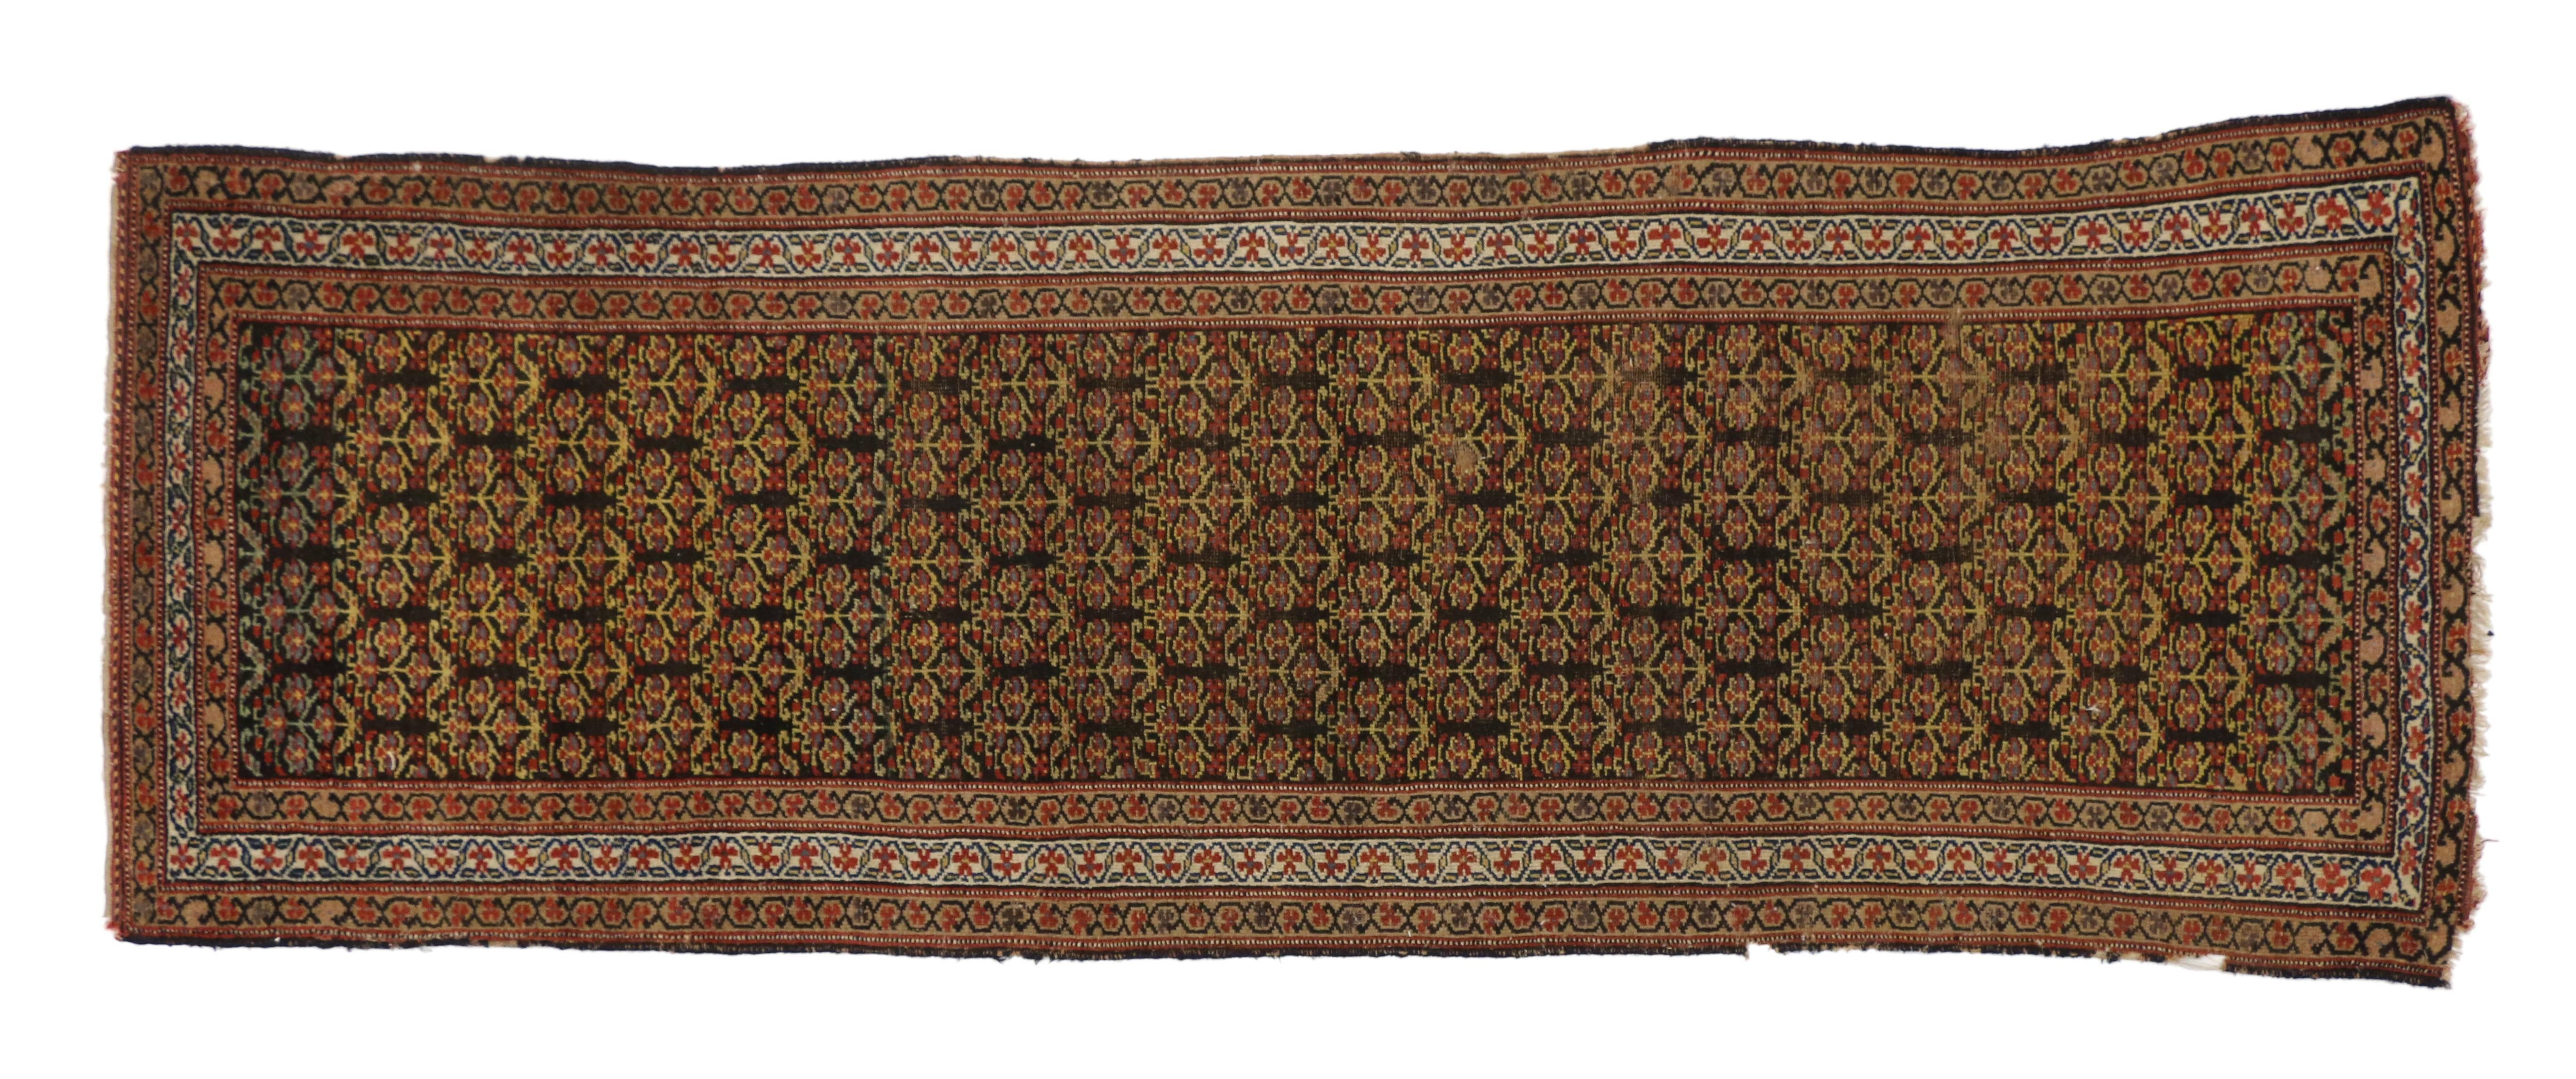 76957, antique Persian Malayer runner with traditional modern style. With its traditional modern style and warm color palette, this antique Persian Malayer runner displays an all-over repeating Herati pattern. Rendered in variegated shades of brown,